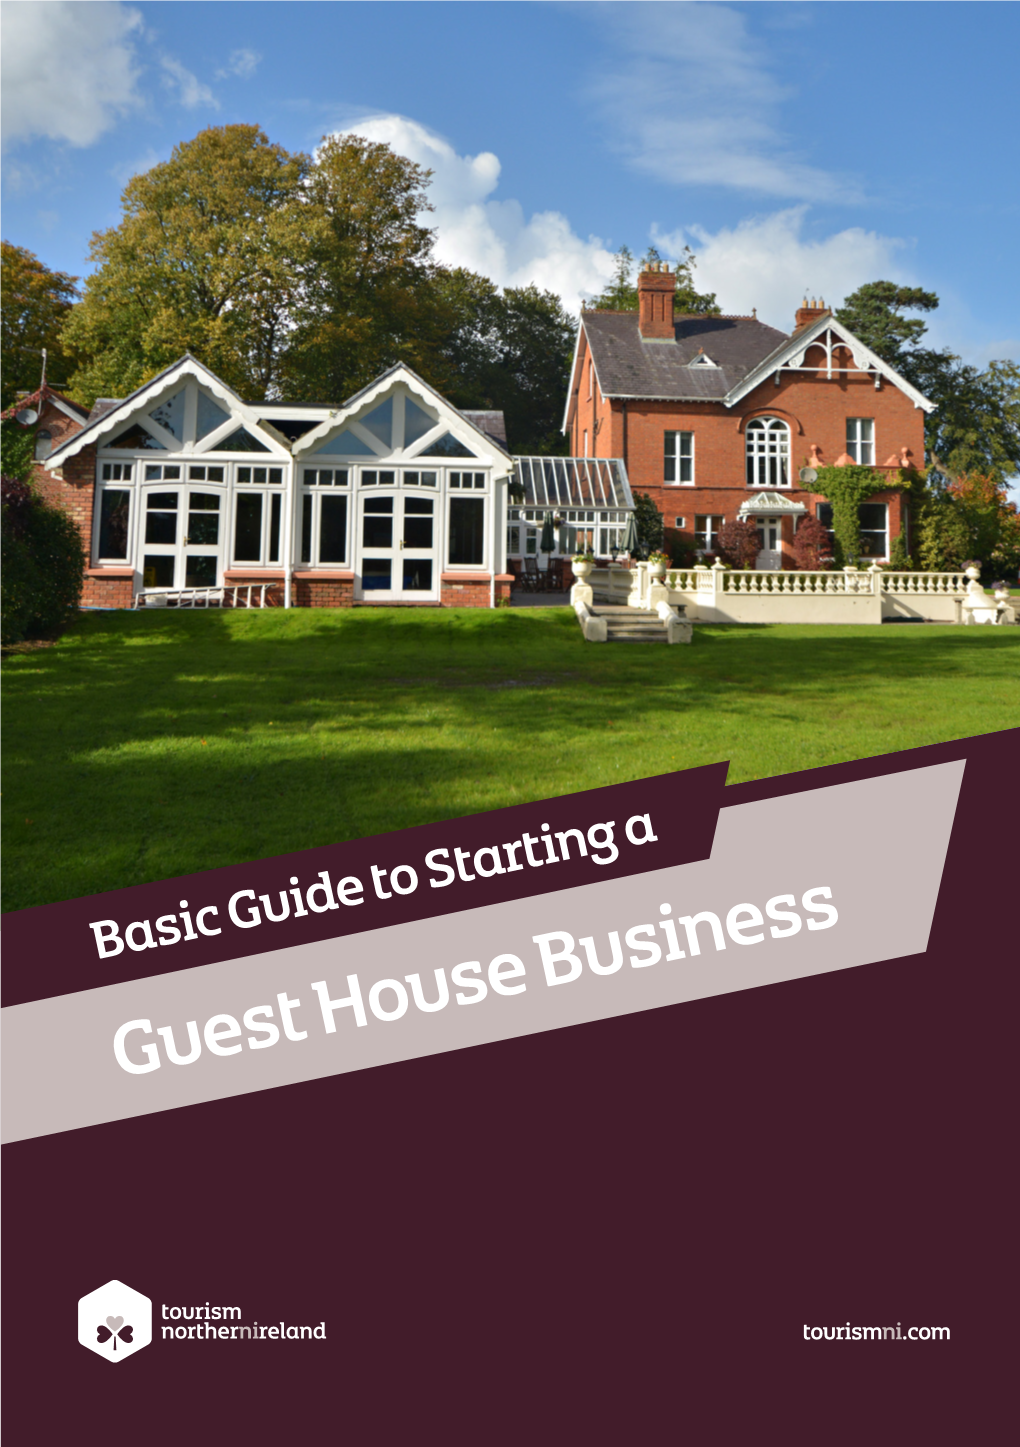 Basic Guide to Starting a Guest House Business